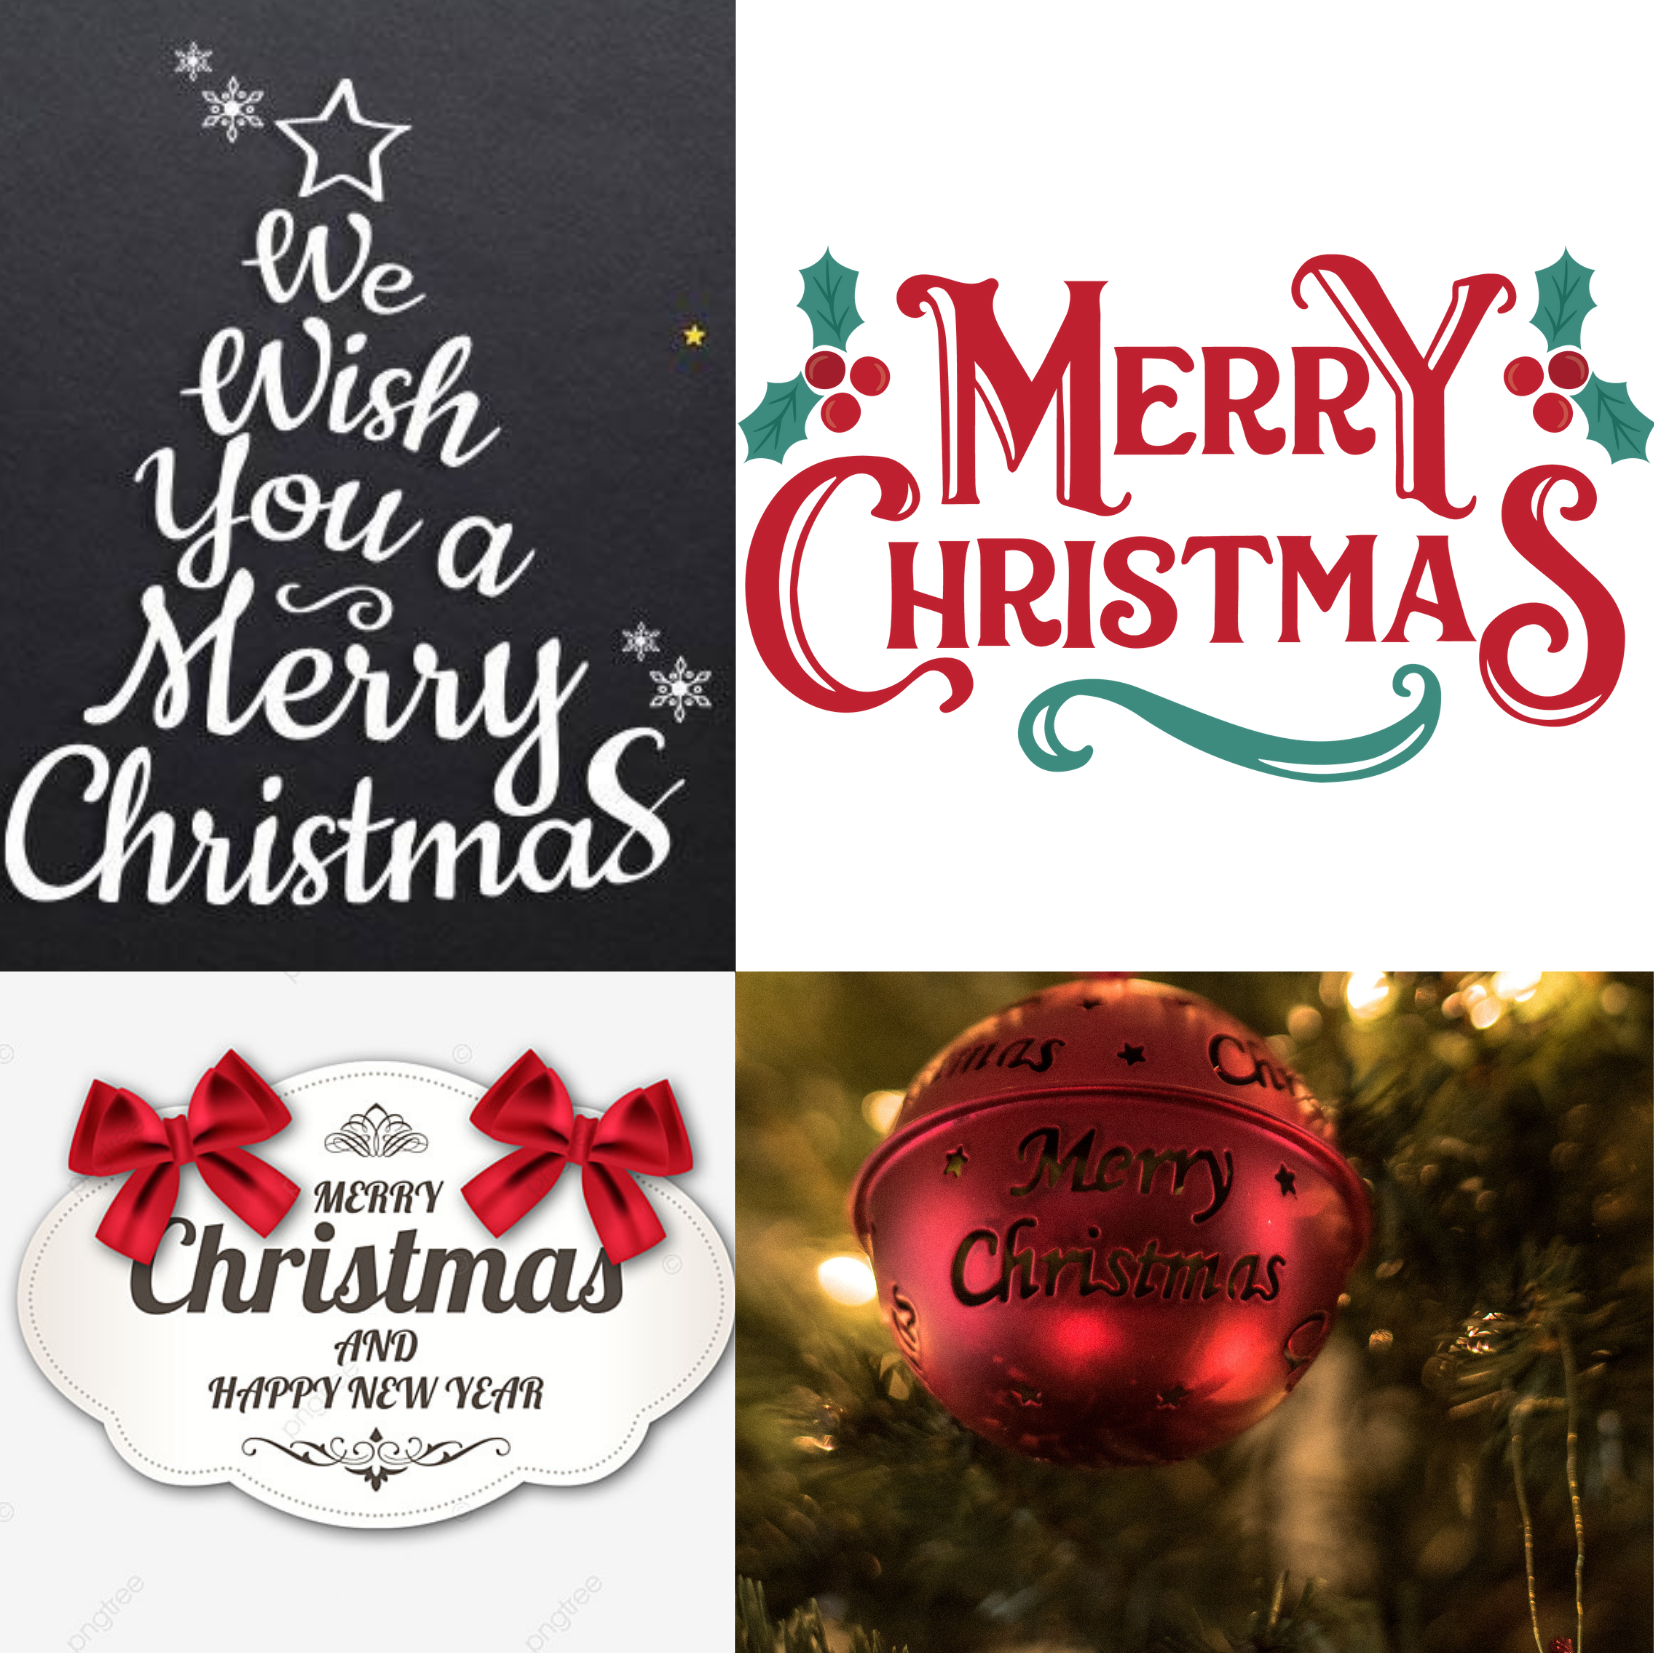 Top 25 Christmas Wishes Images